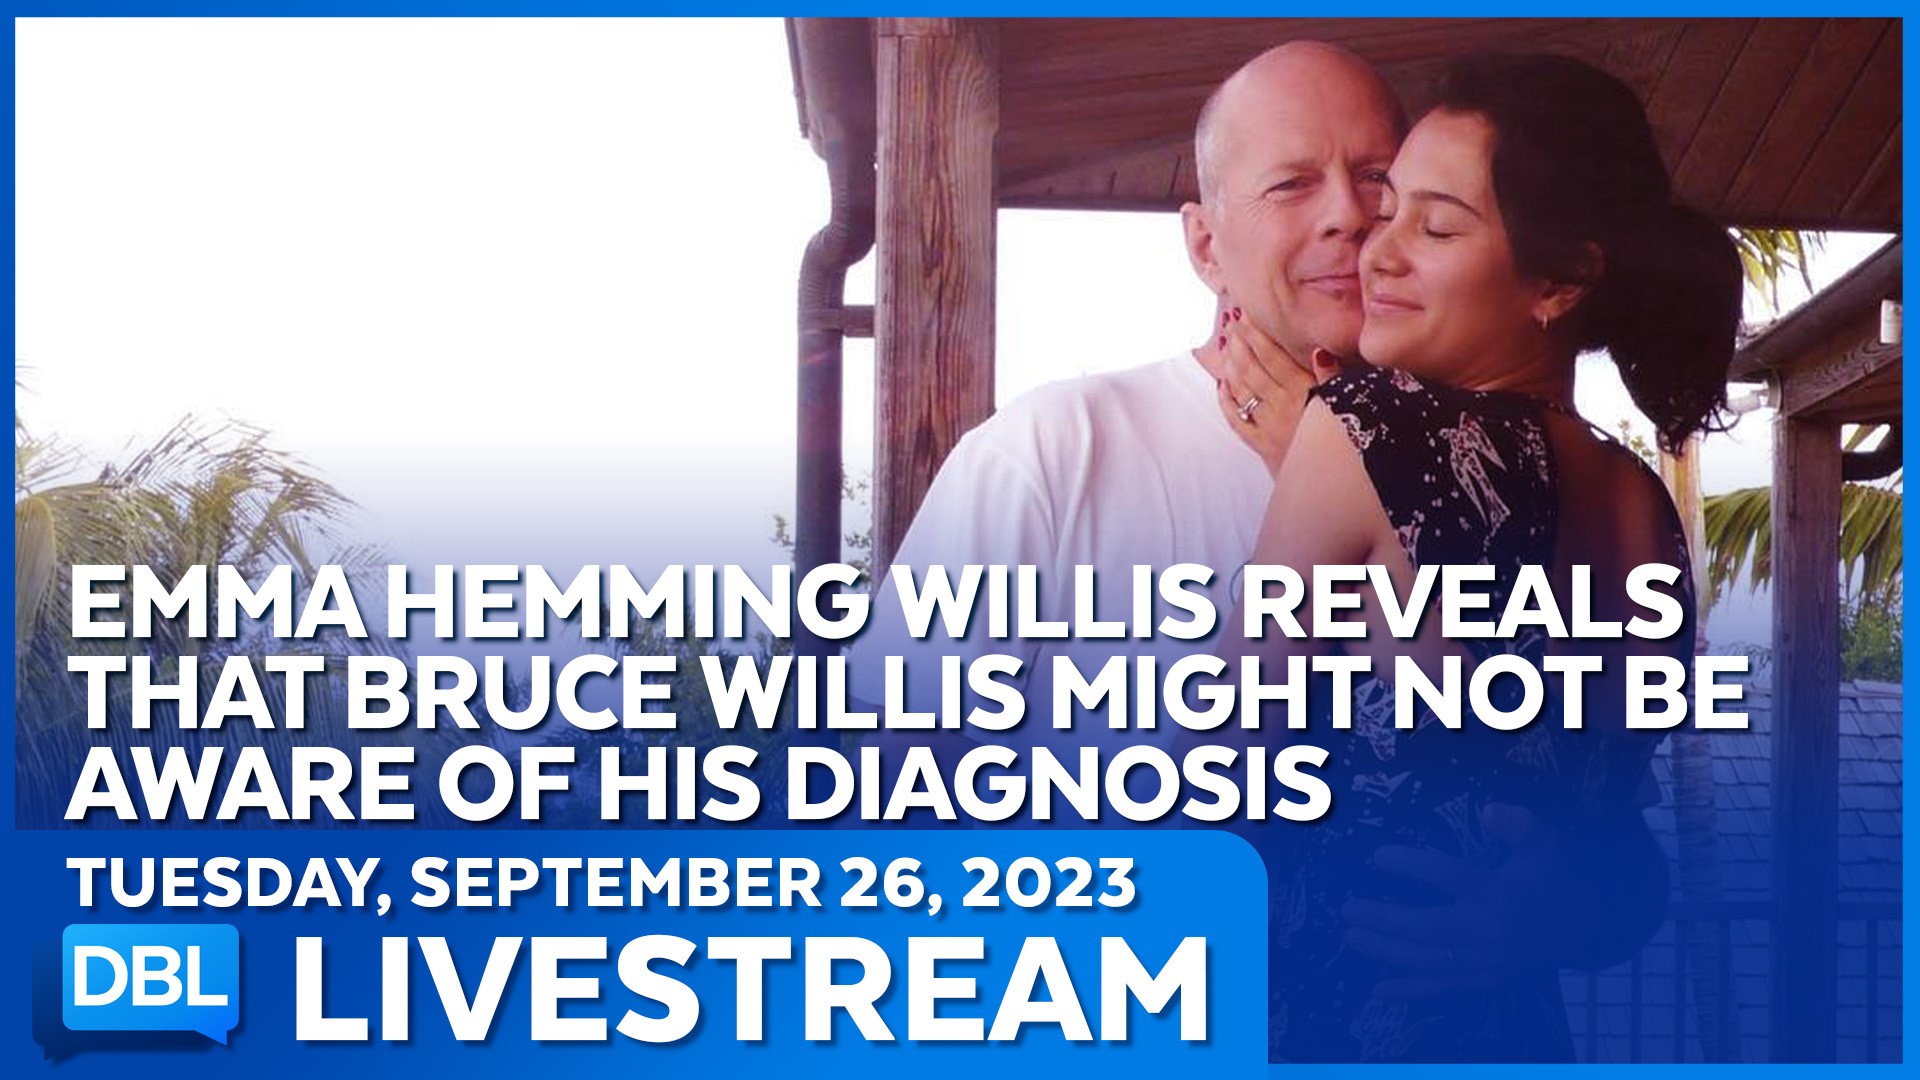 Bruce Willis' Wife Speaks out About His Dementia Diagnosis